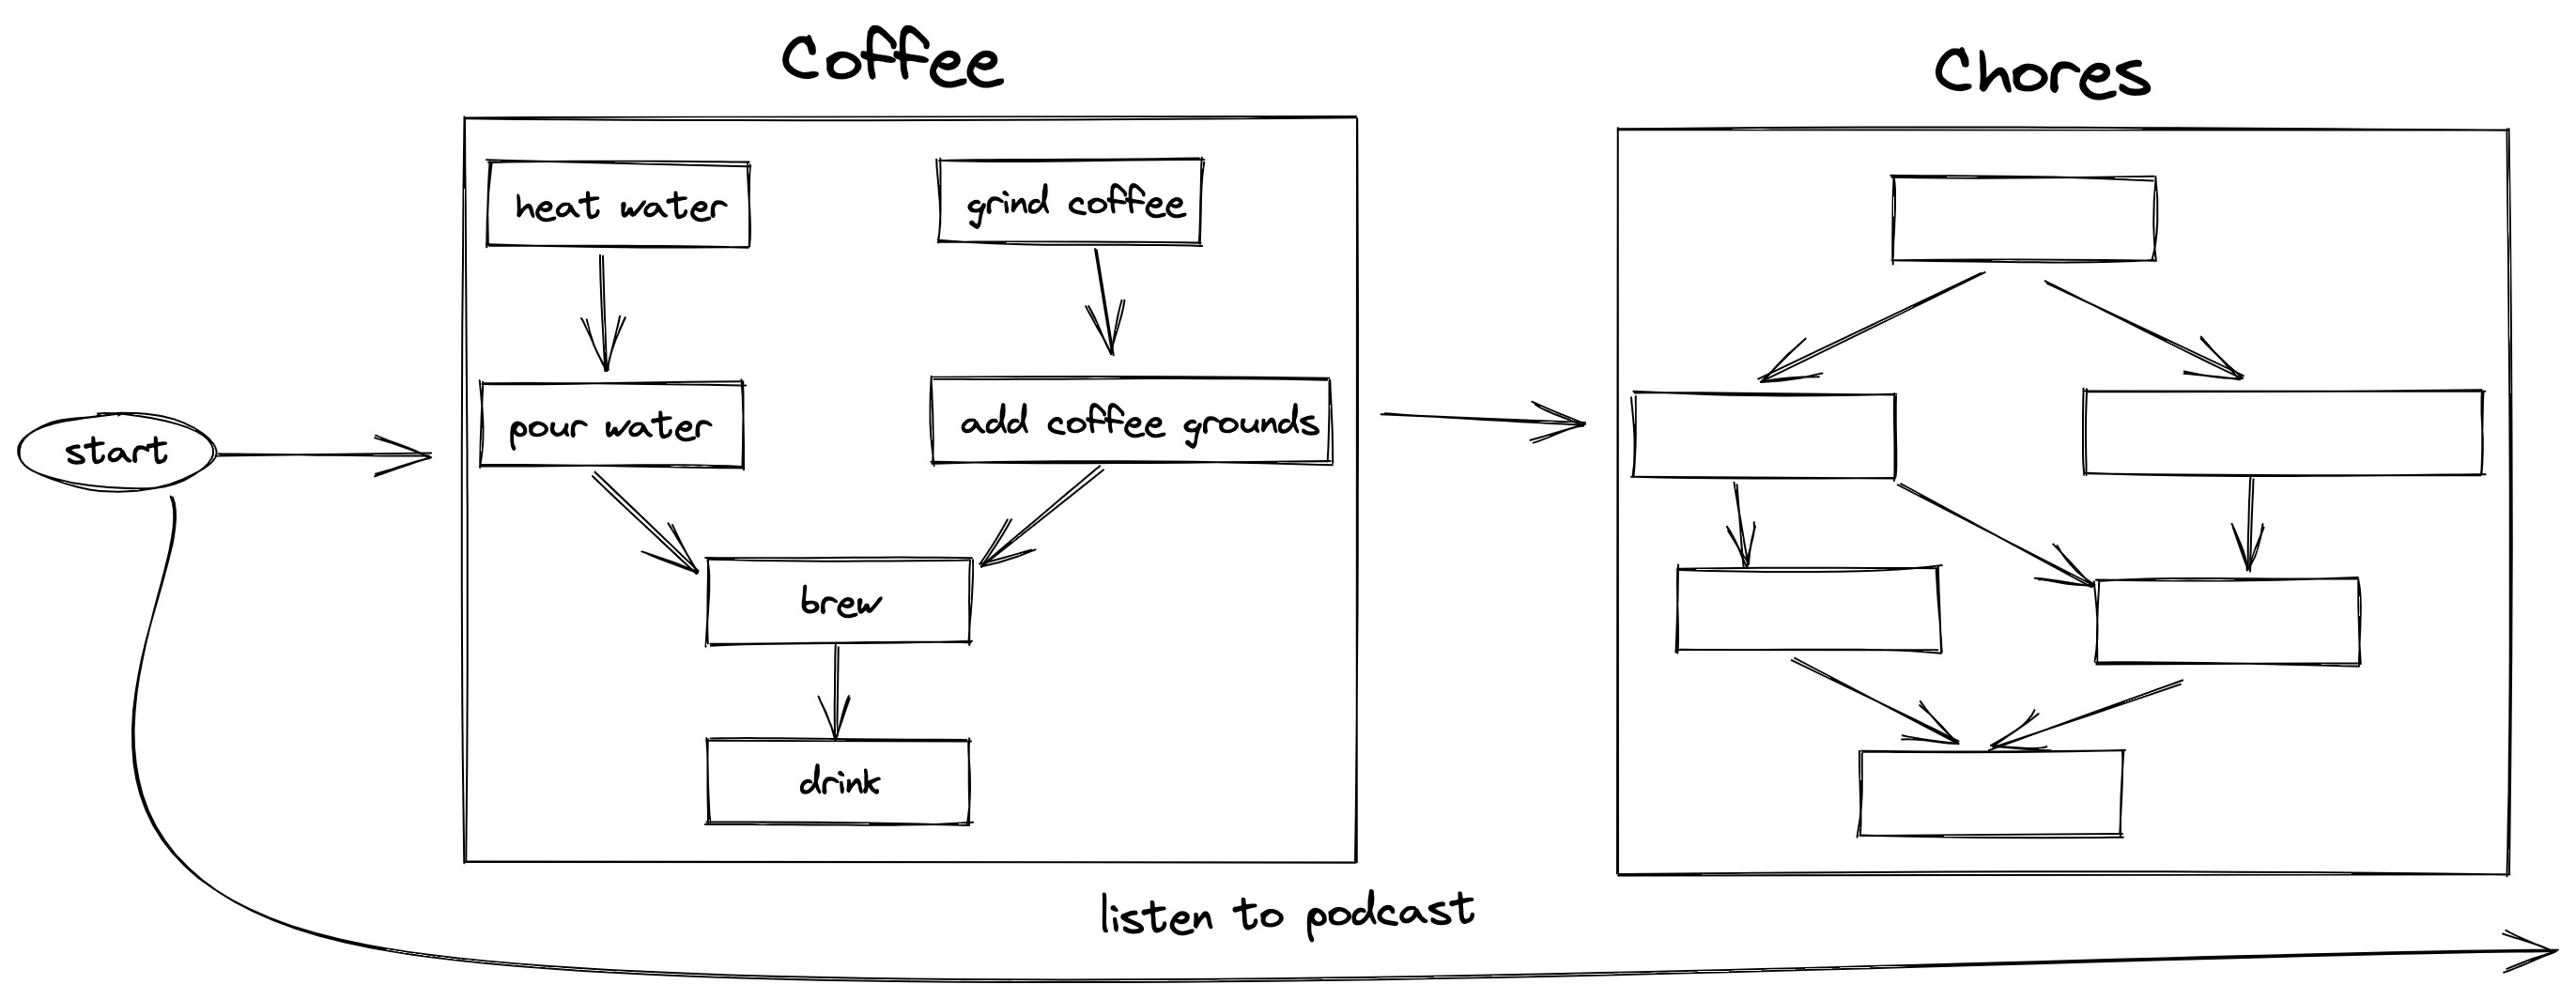 A workflow: the previous coffee-making workflow is in a box on the left, and a chores workflow is in a box on the right. An arrow leads from start, to coffee, to chores. Another arrow runs along the entire bottom of the image, labeled "listen to podcast."